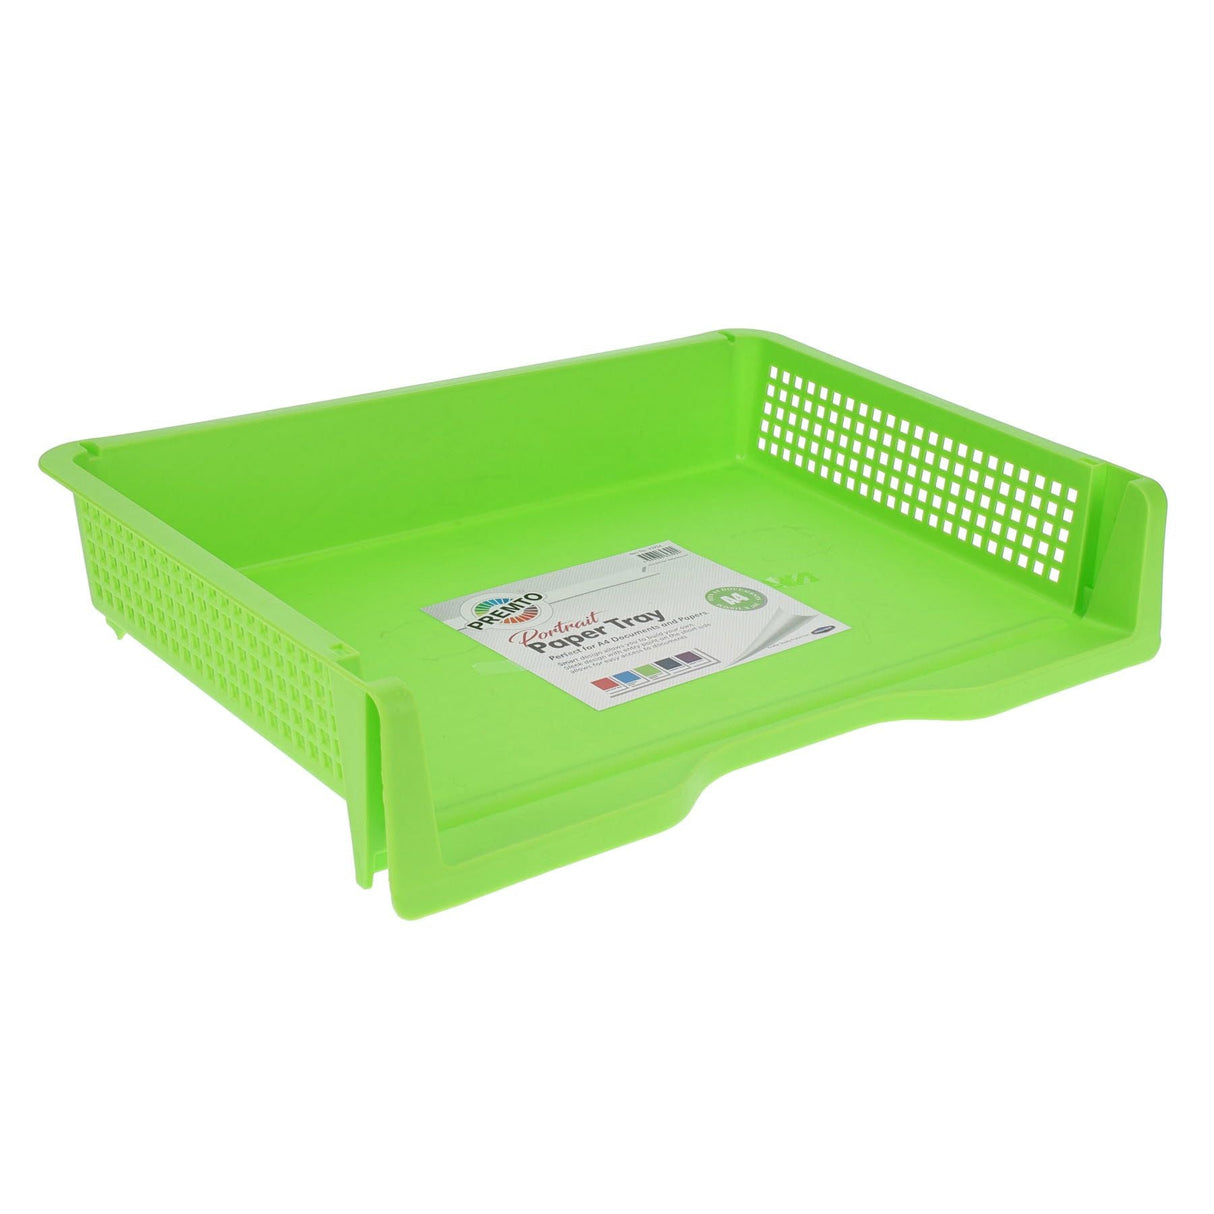 Premto A4 Paper Tray - Caterpillar Green-File Boxes & Storage-Premto | Buy Online at Stationery Shop